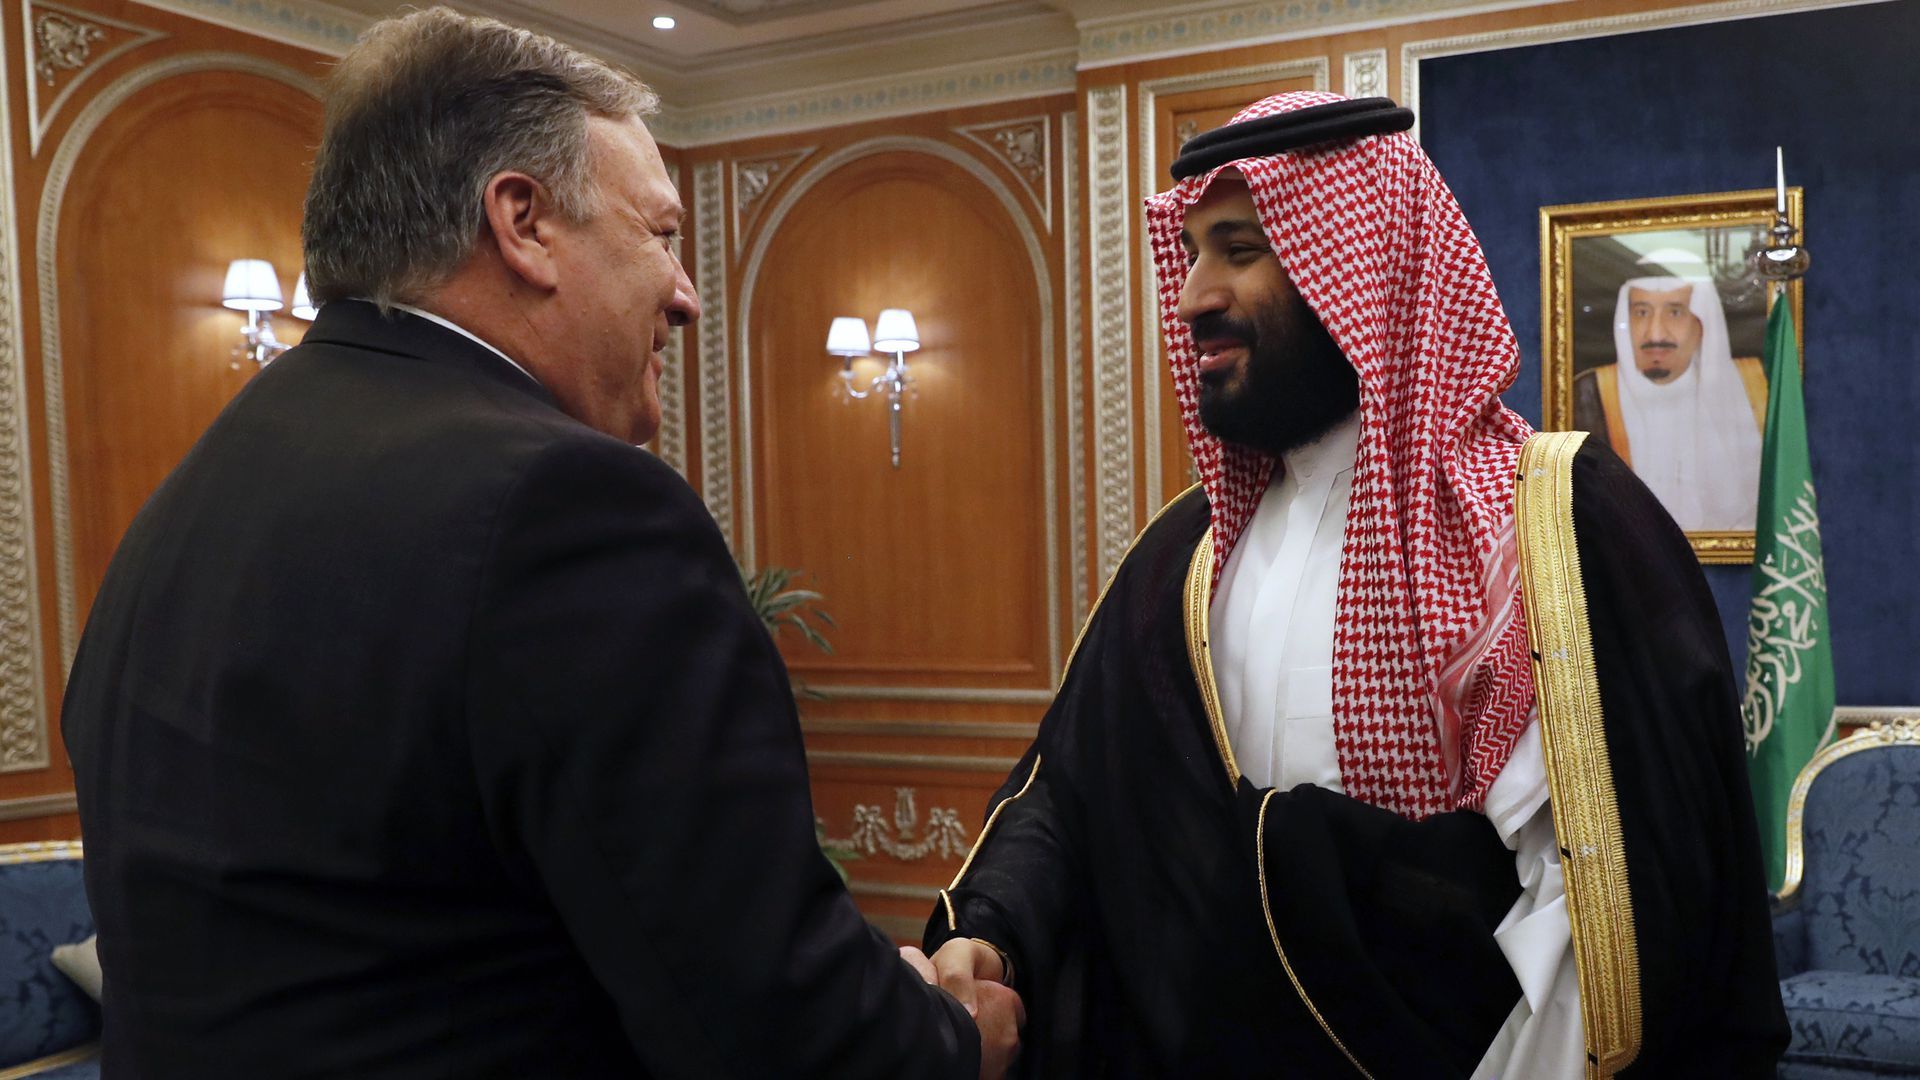 Sec. of State Mike Pompeo greets Mohammed bin Salman